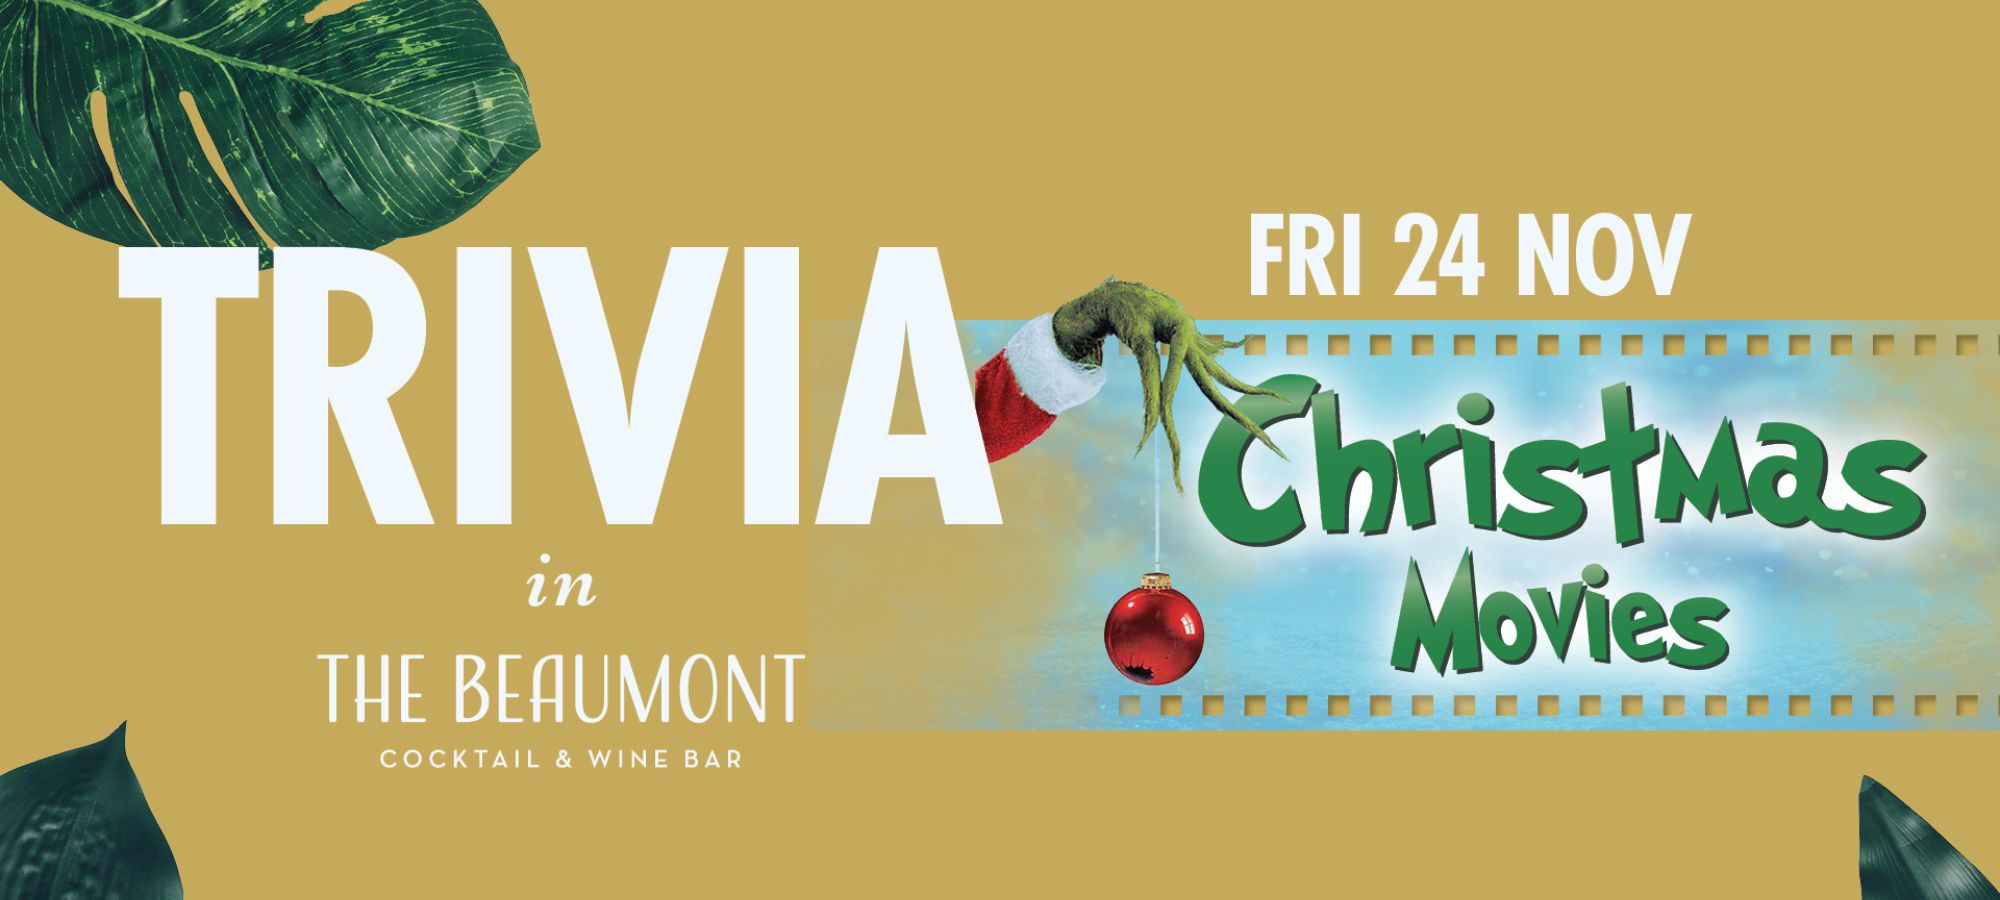 Trivia in The Beaumont – Christmas Movies